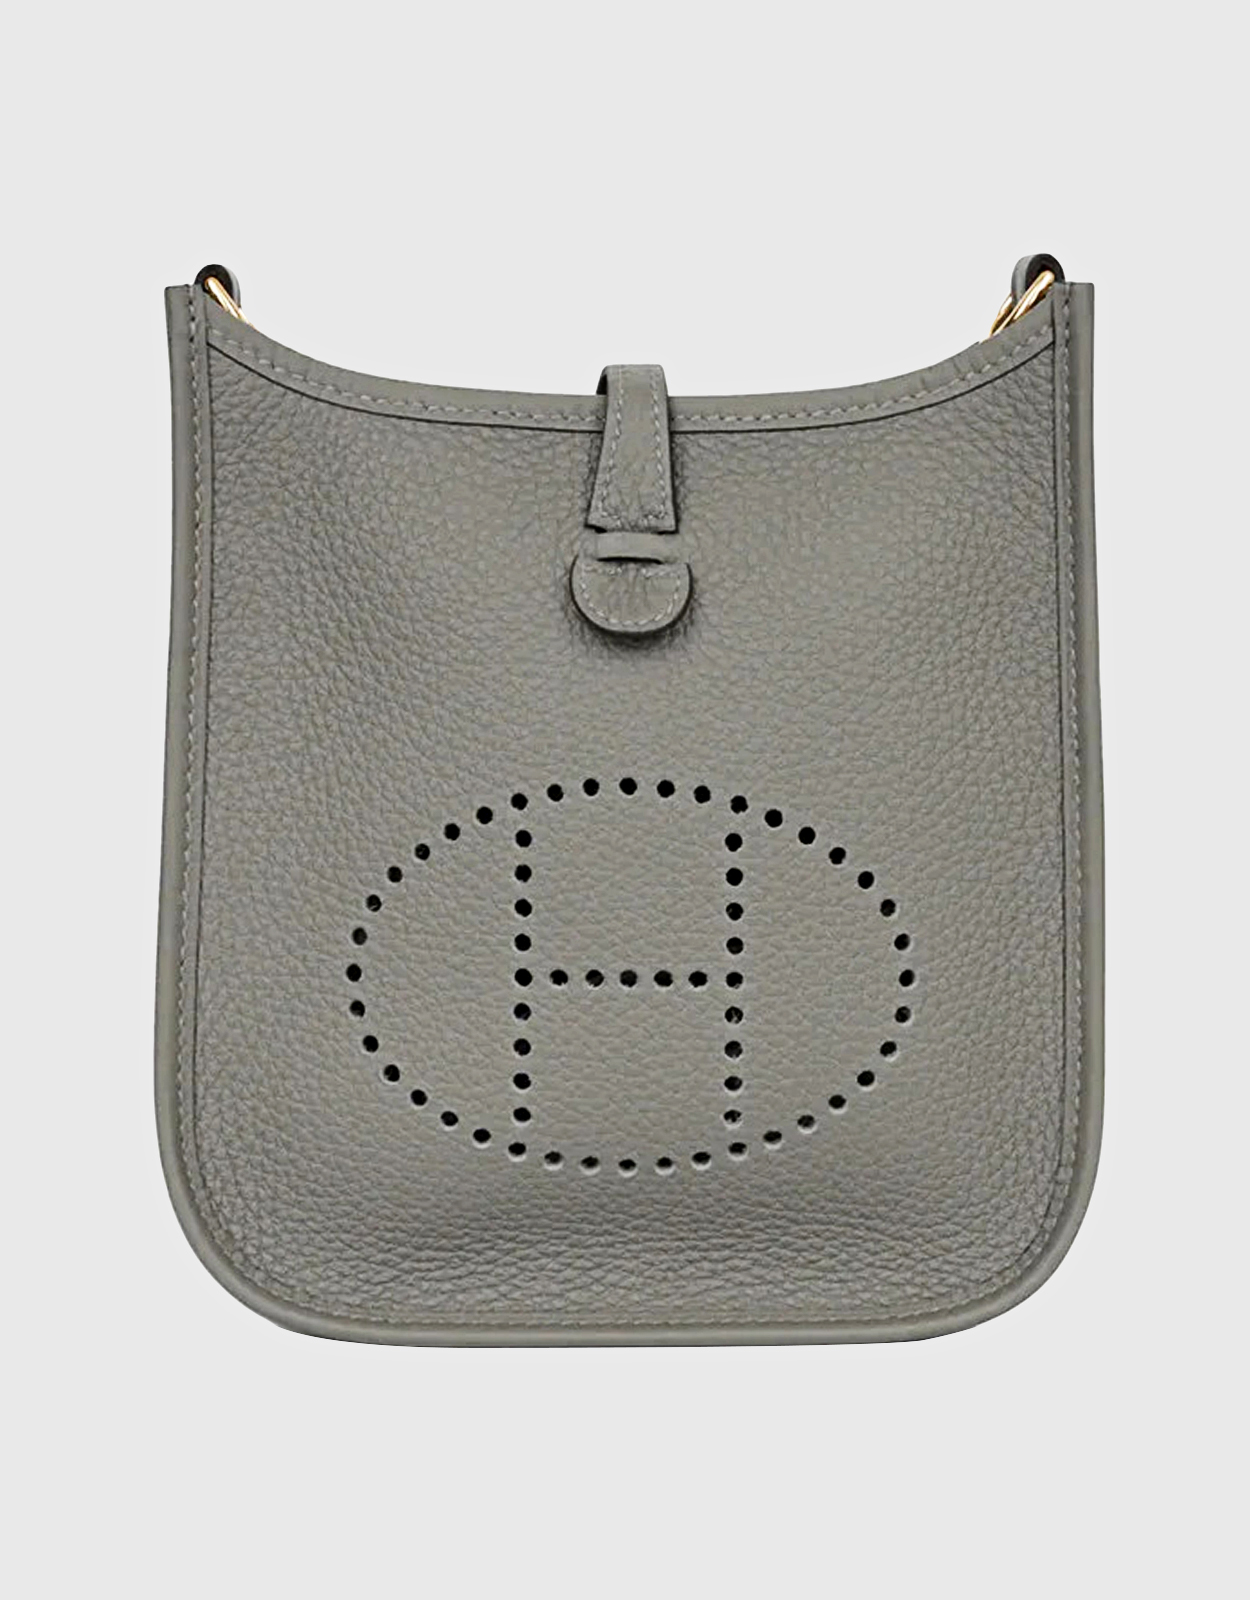 Two Hermes Bags in Gris Meyer (new color)